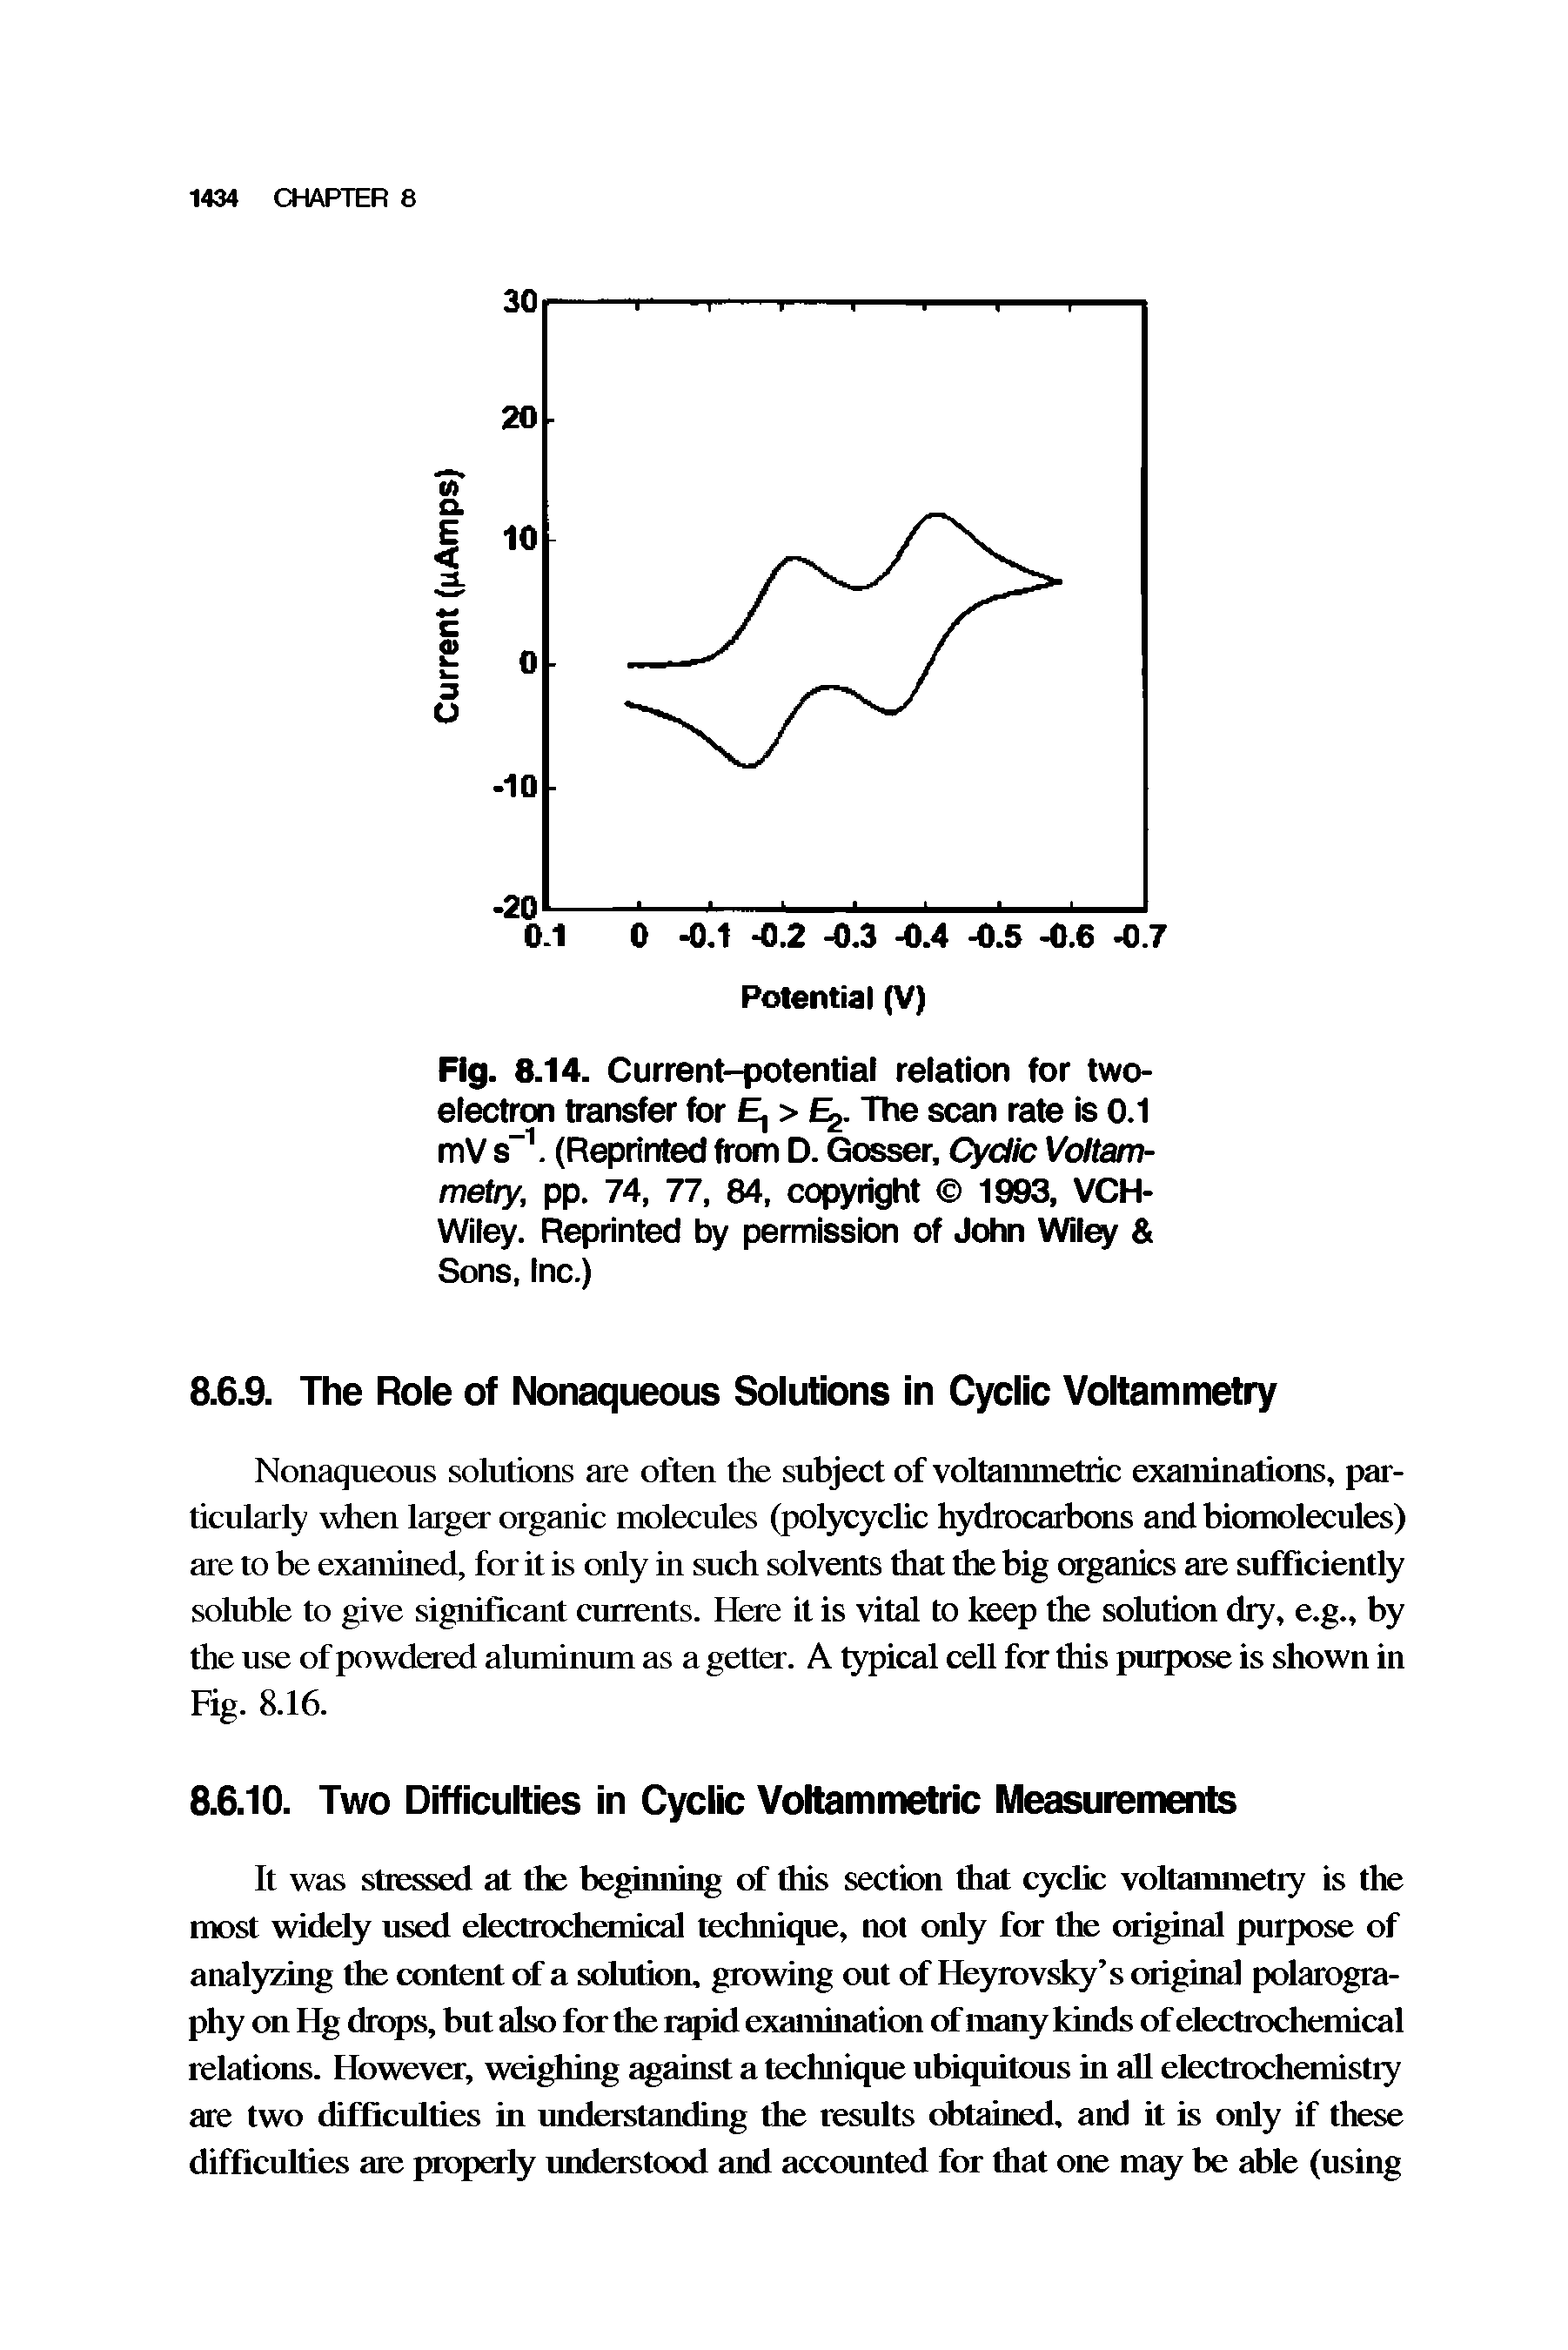 Fig. 8.14. Current-potential relation for two-electron transfer for E, > E The scan rate is 0.1 mV s-1. (Reprinted from D. Gosser, Cyclic Voltammetry, pp. 74, 77, 84, copyright 1993, VCH-Wiley. Reprinted by permission of John Wiley Sons, Inc.)...